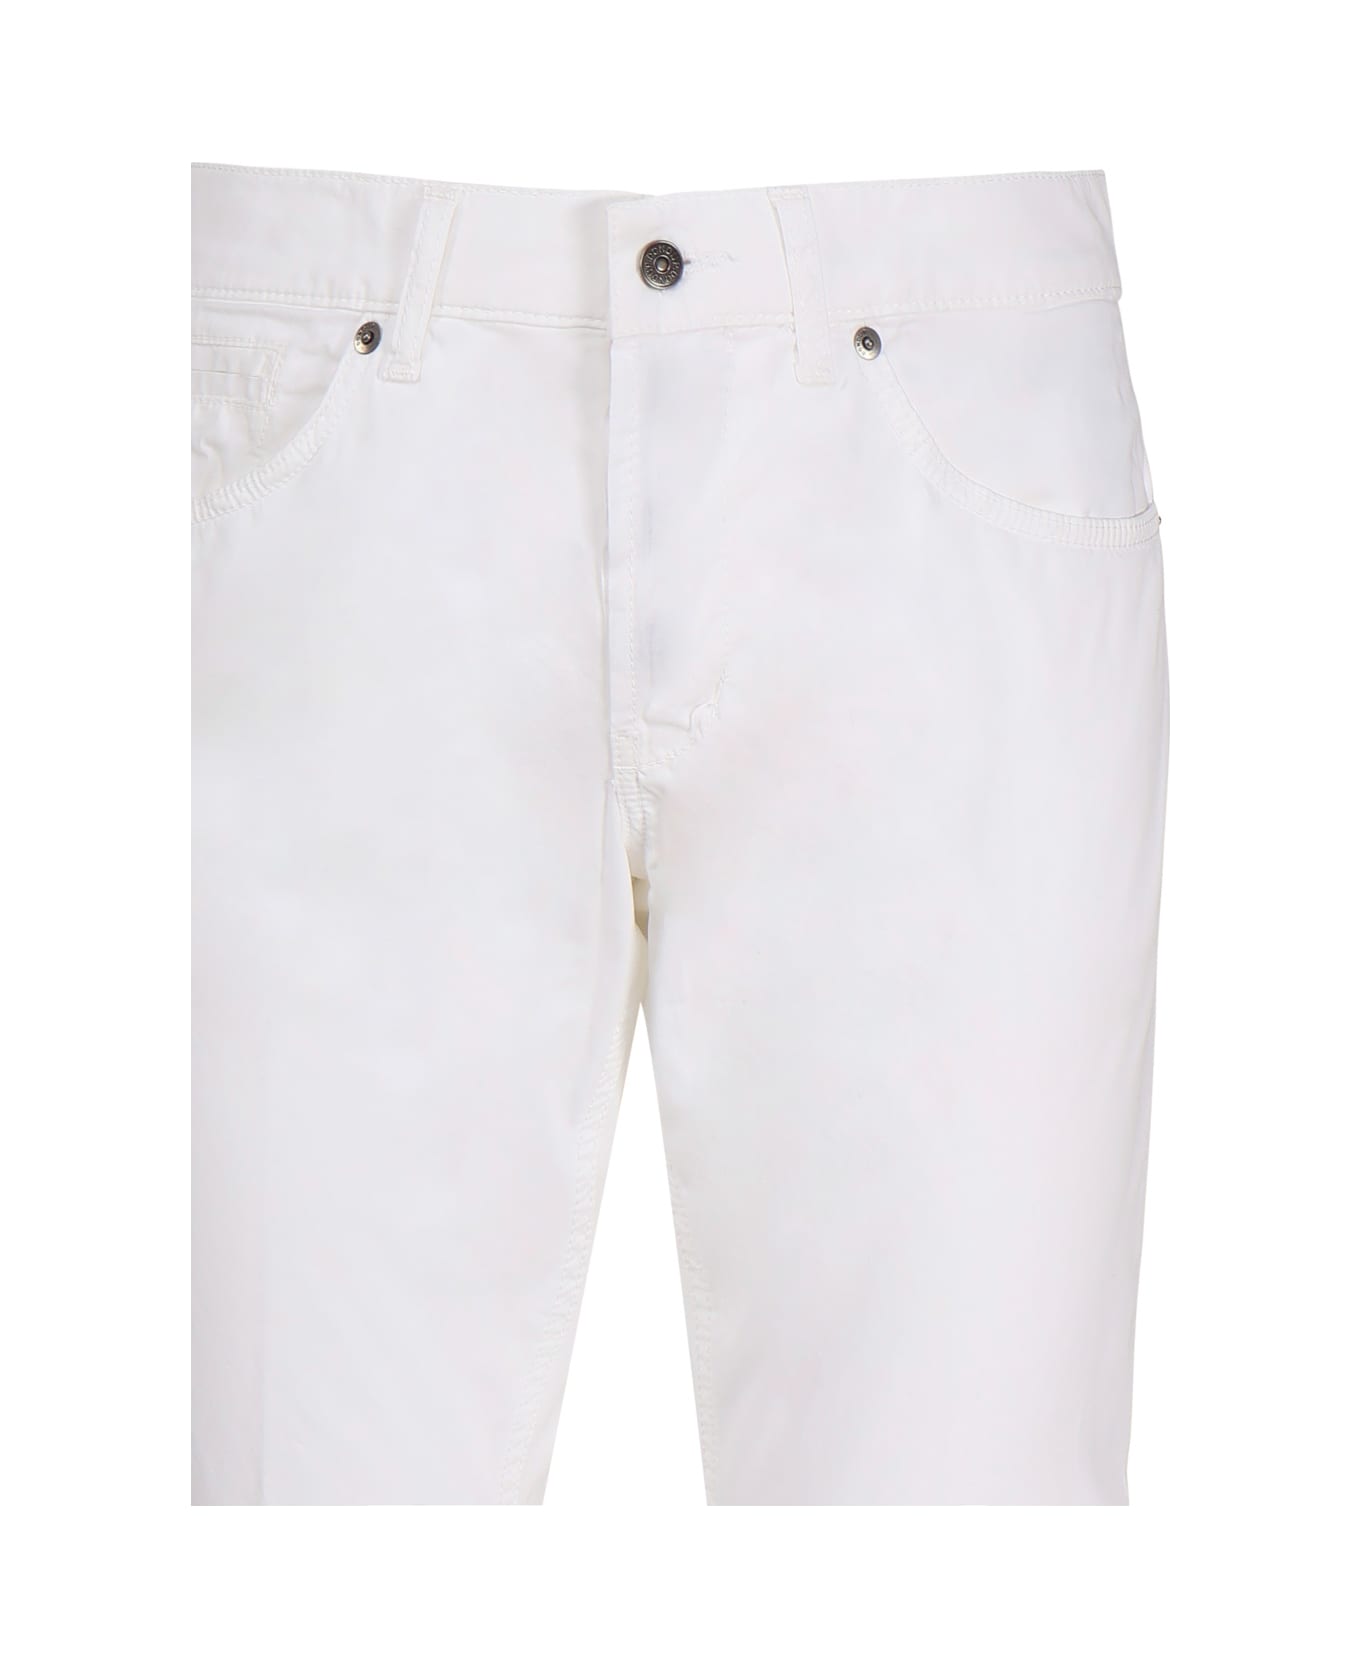 Dondup Straight Jeans - White